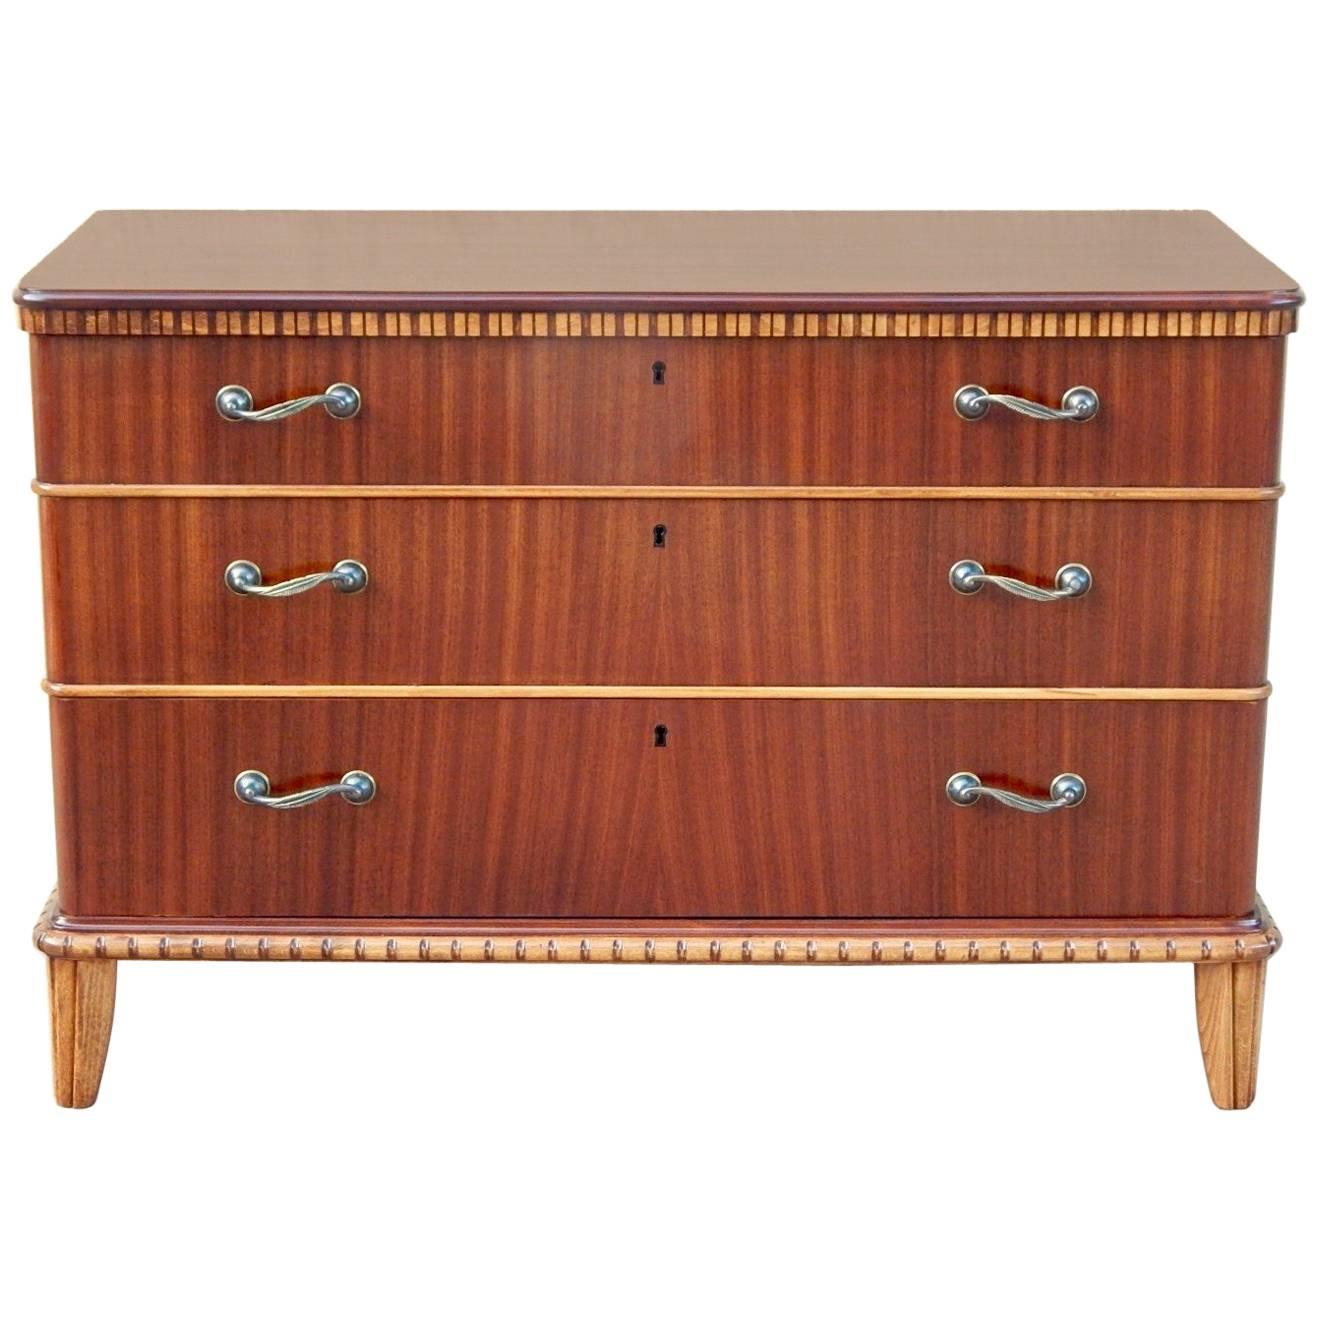 Swedish 1940s Moderne Chest of Drawers in Mahogany and Birch For Sale